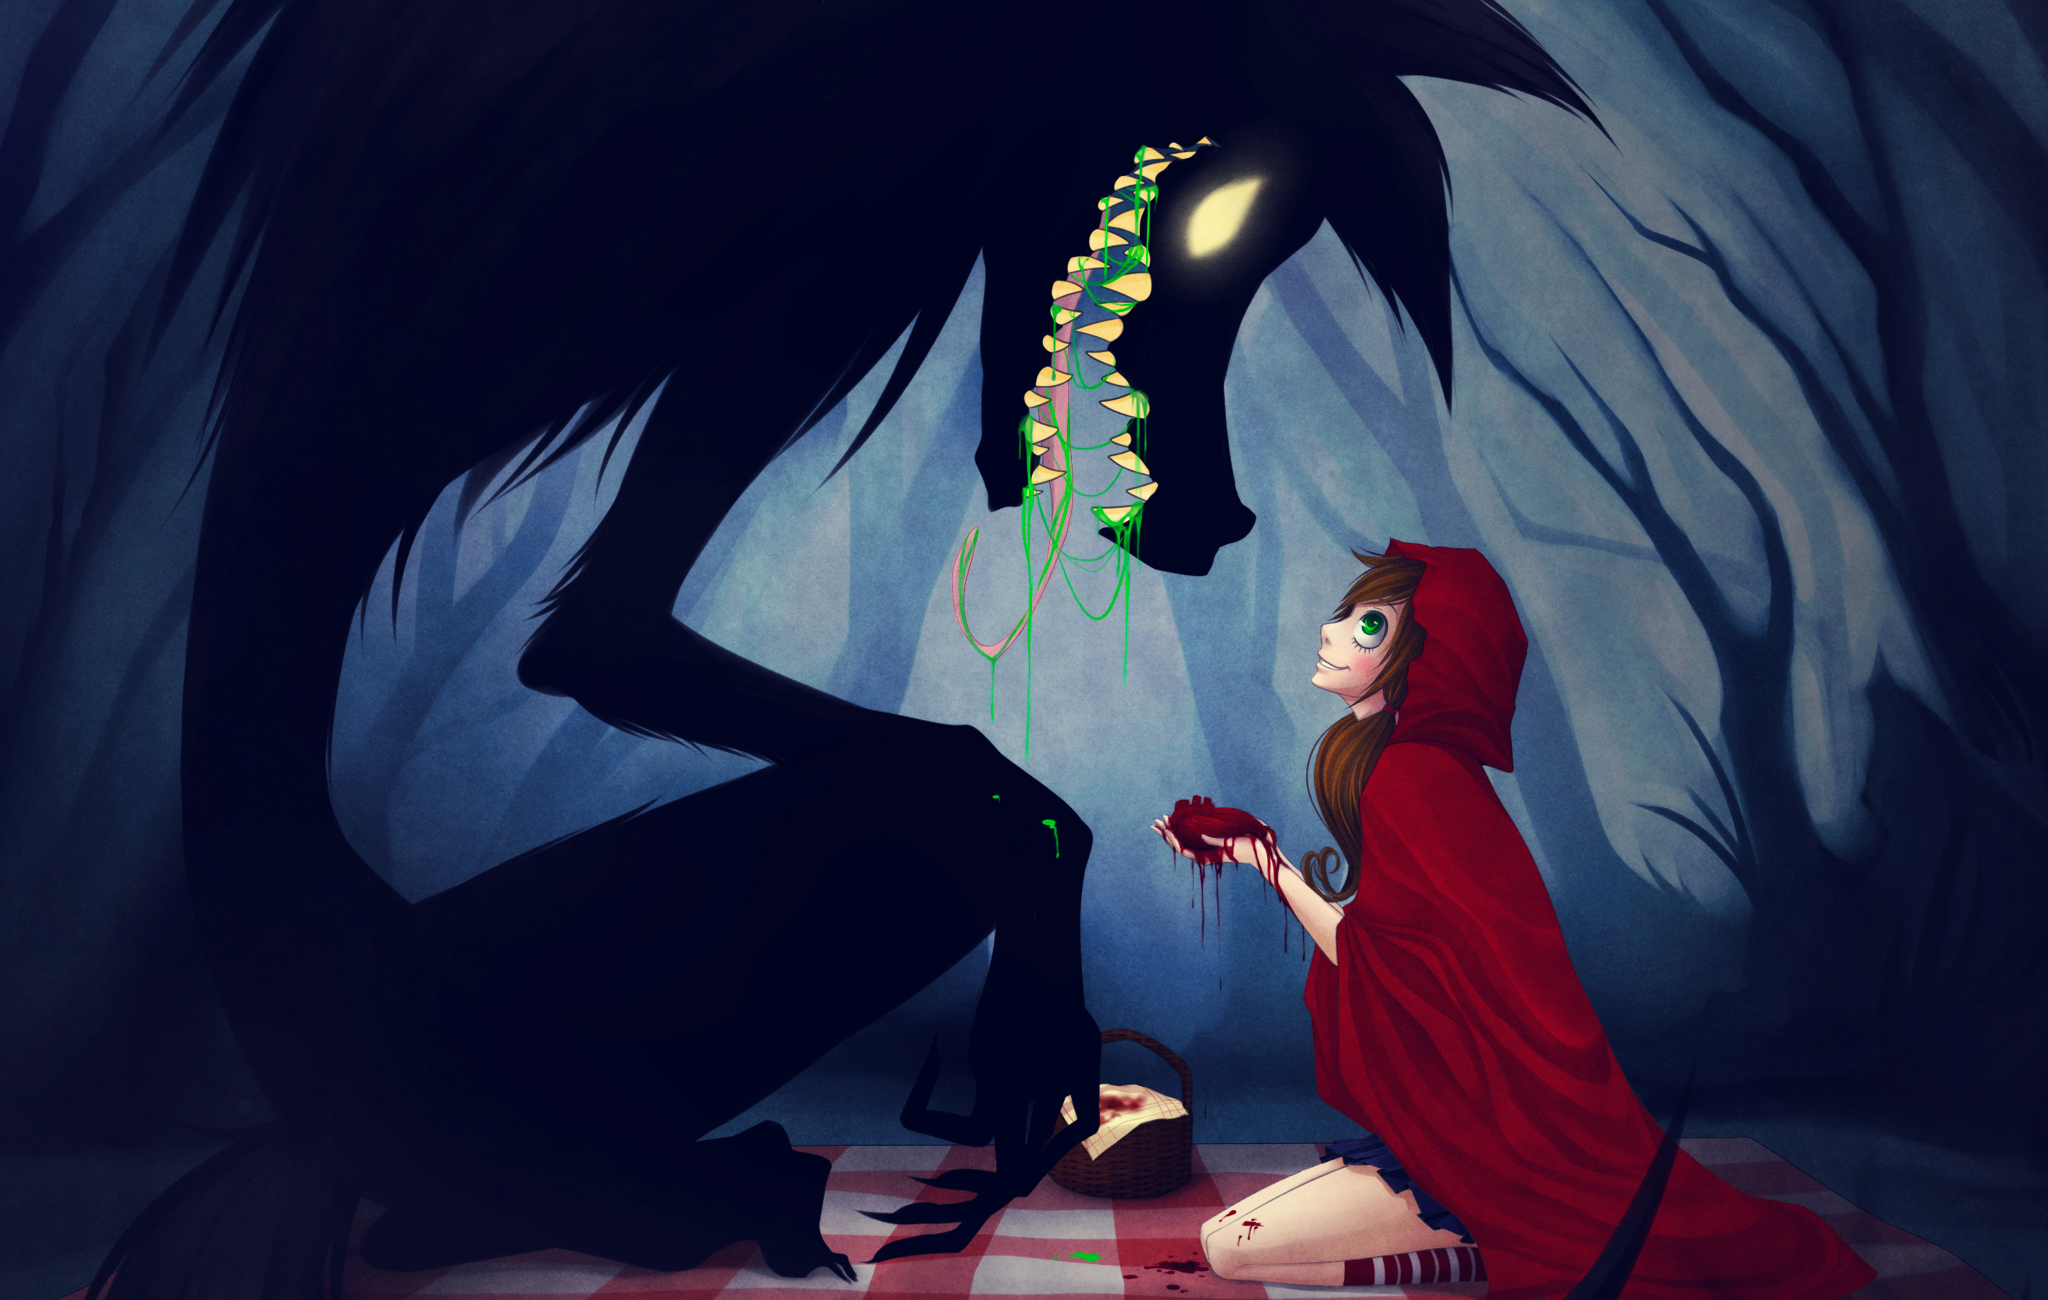 Gallery For Gt Little Red Riding Hood And The Wolf Anime